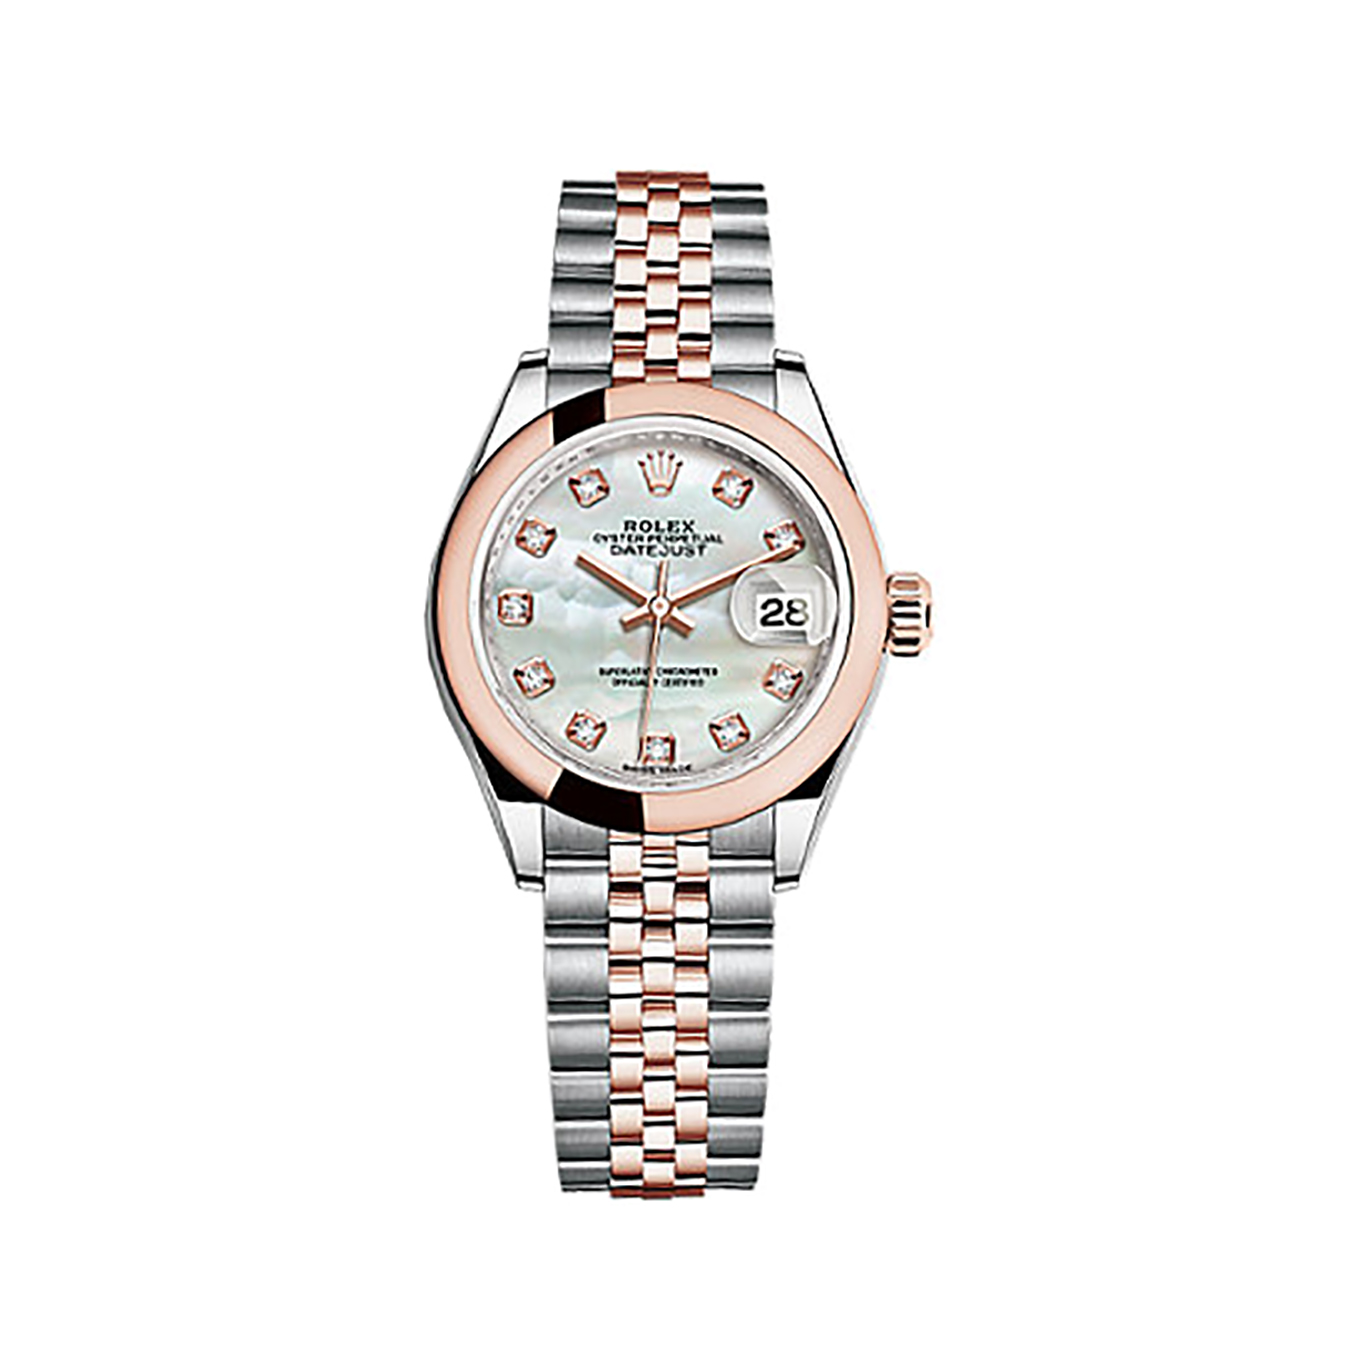 Lady-Datejust 28 279161 Rose Gold & Stainless Steel Watch (White Mother-of-pearl Set with Diamonds)